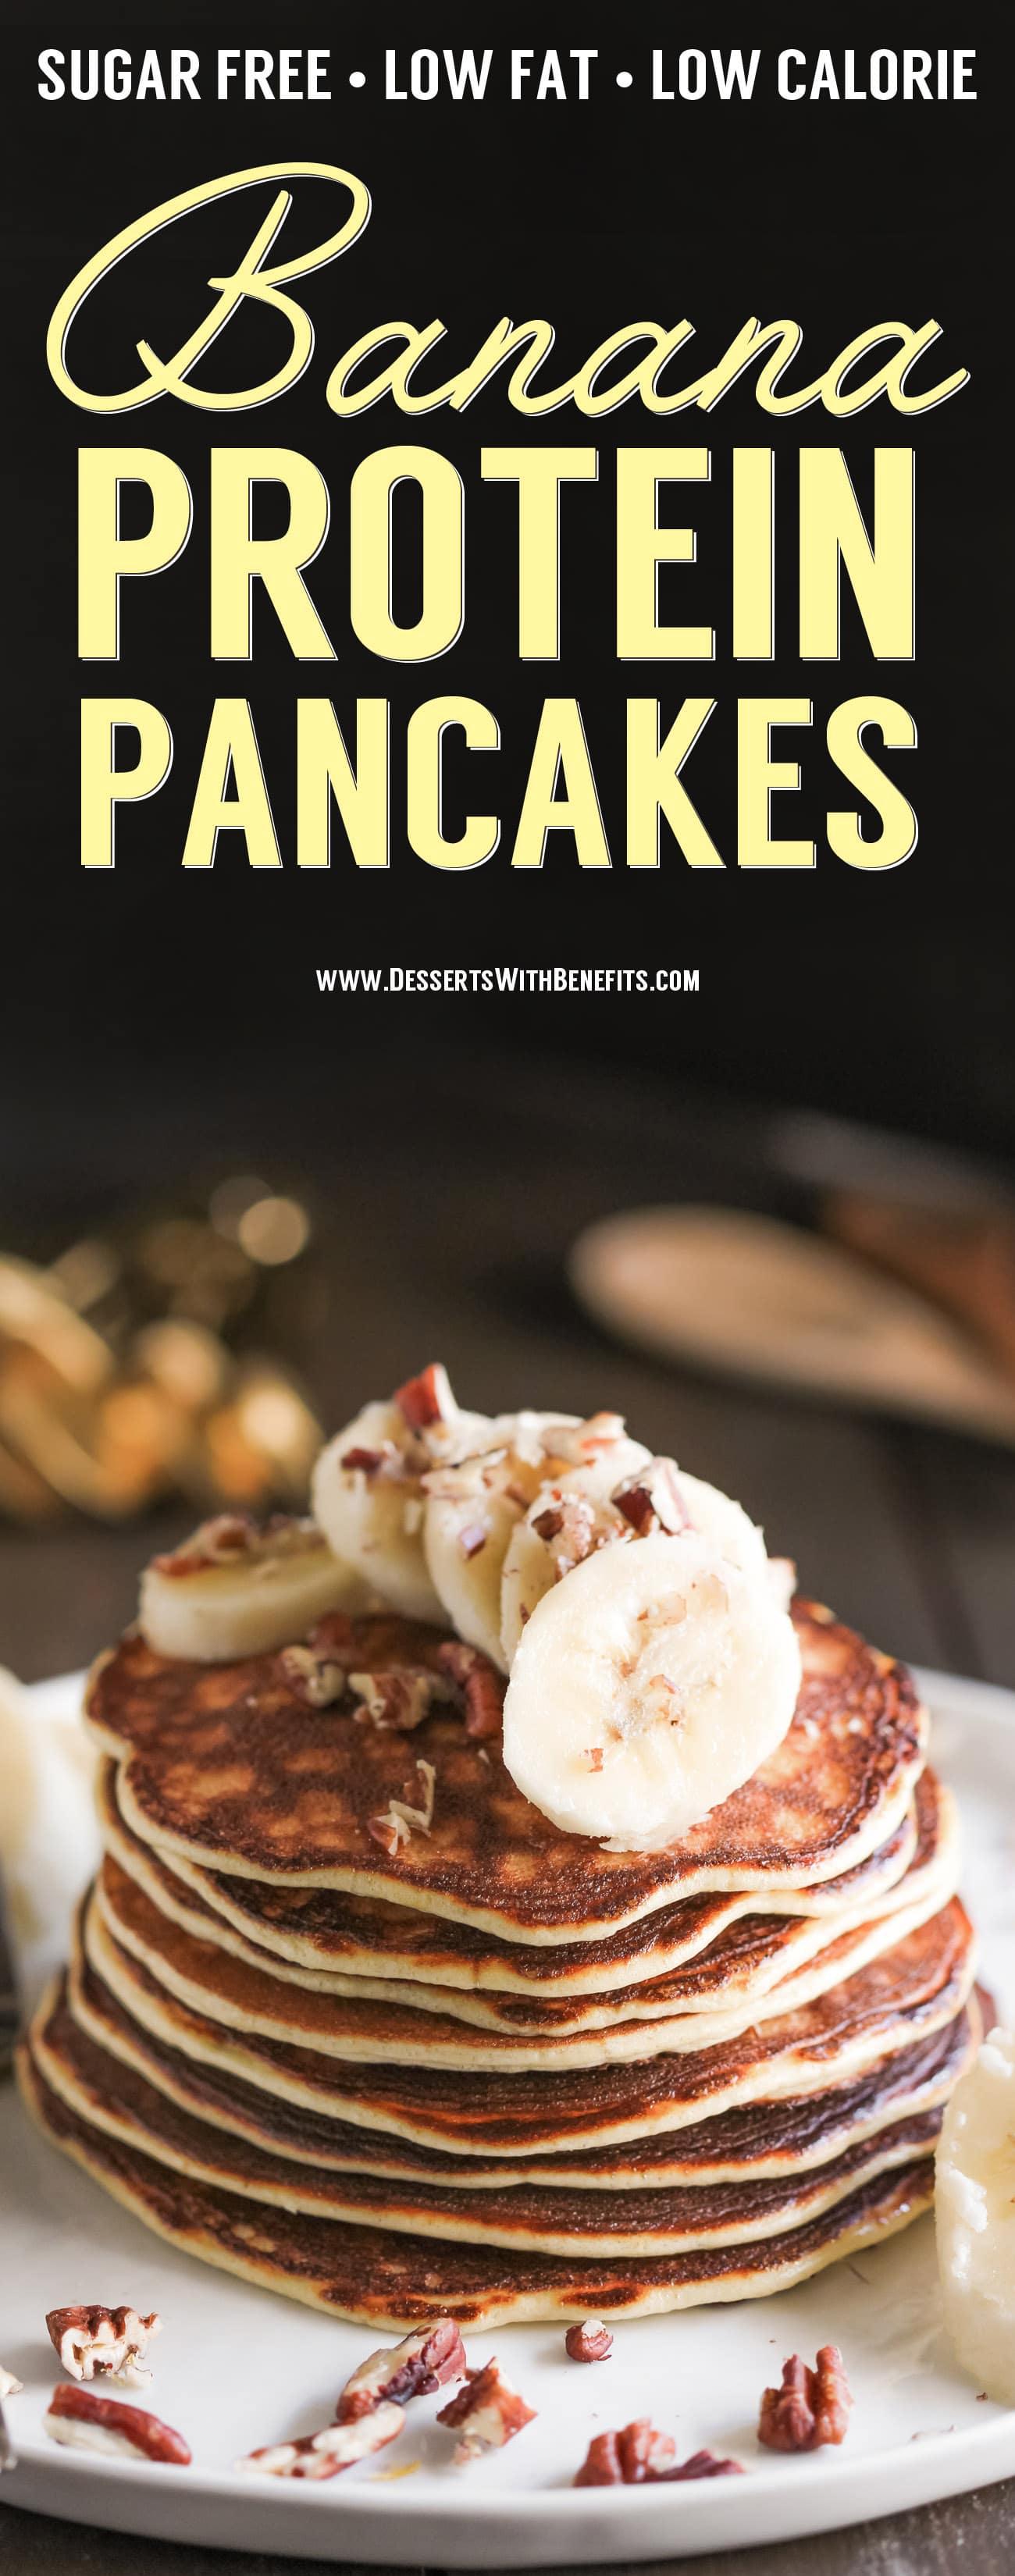 These Healthy Banana Protein Pancakes are uber light and fluffy, and they're perfectly sweet too. One bite and you won't be able to tell they're gluten free, refined sugar free, low fat, and packed with a whopping 22g of protein per serving! Healthy Dessert Recipes at the Desserts With Benefits Blog (www.DessertsWithBenefits.com)